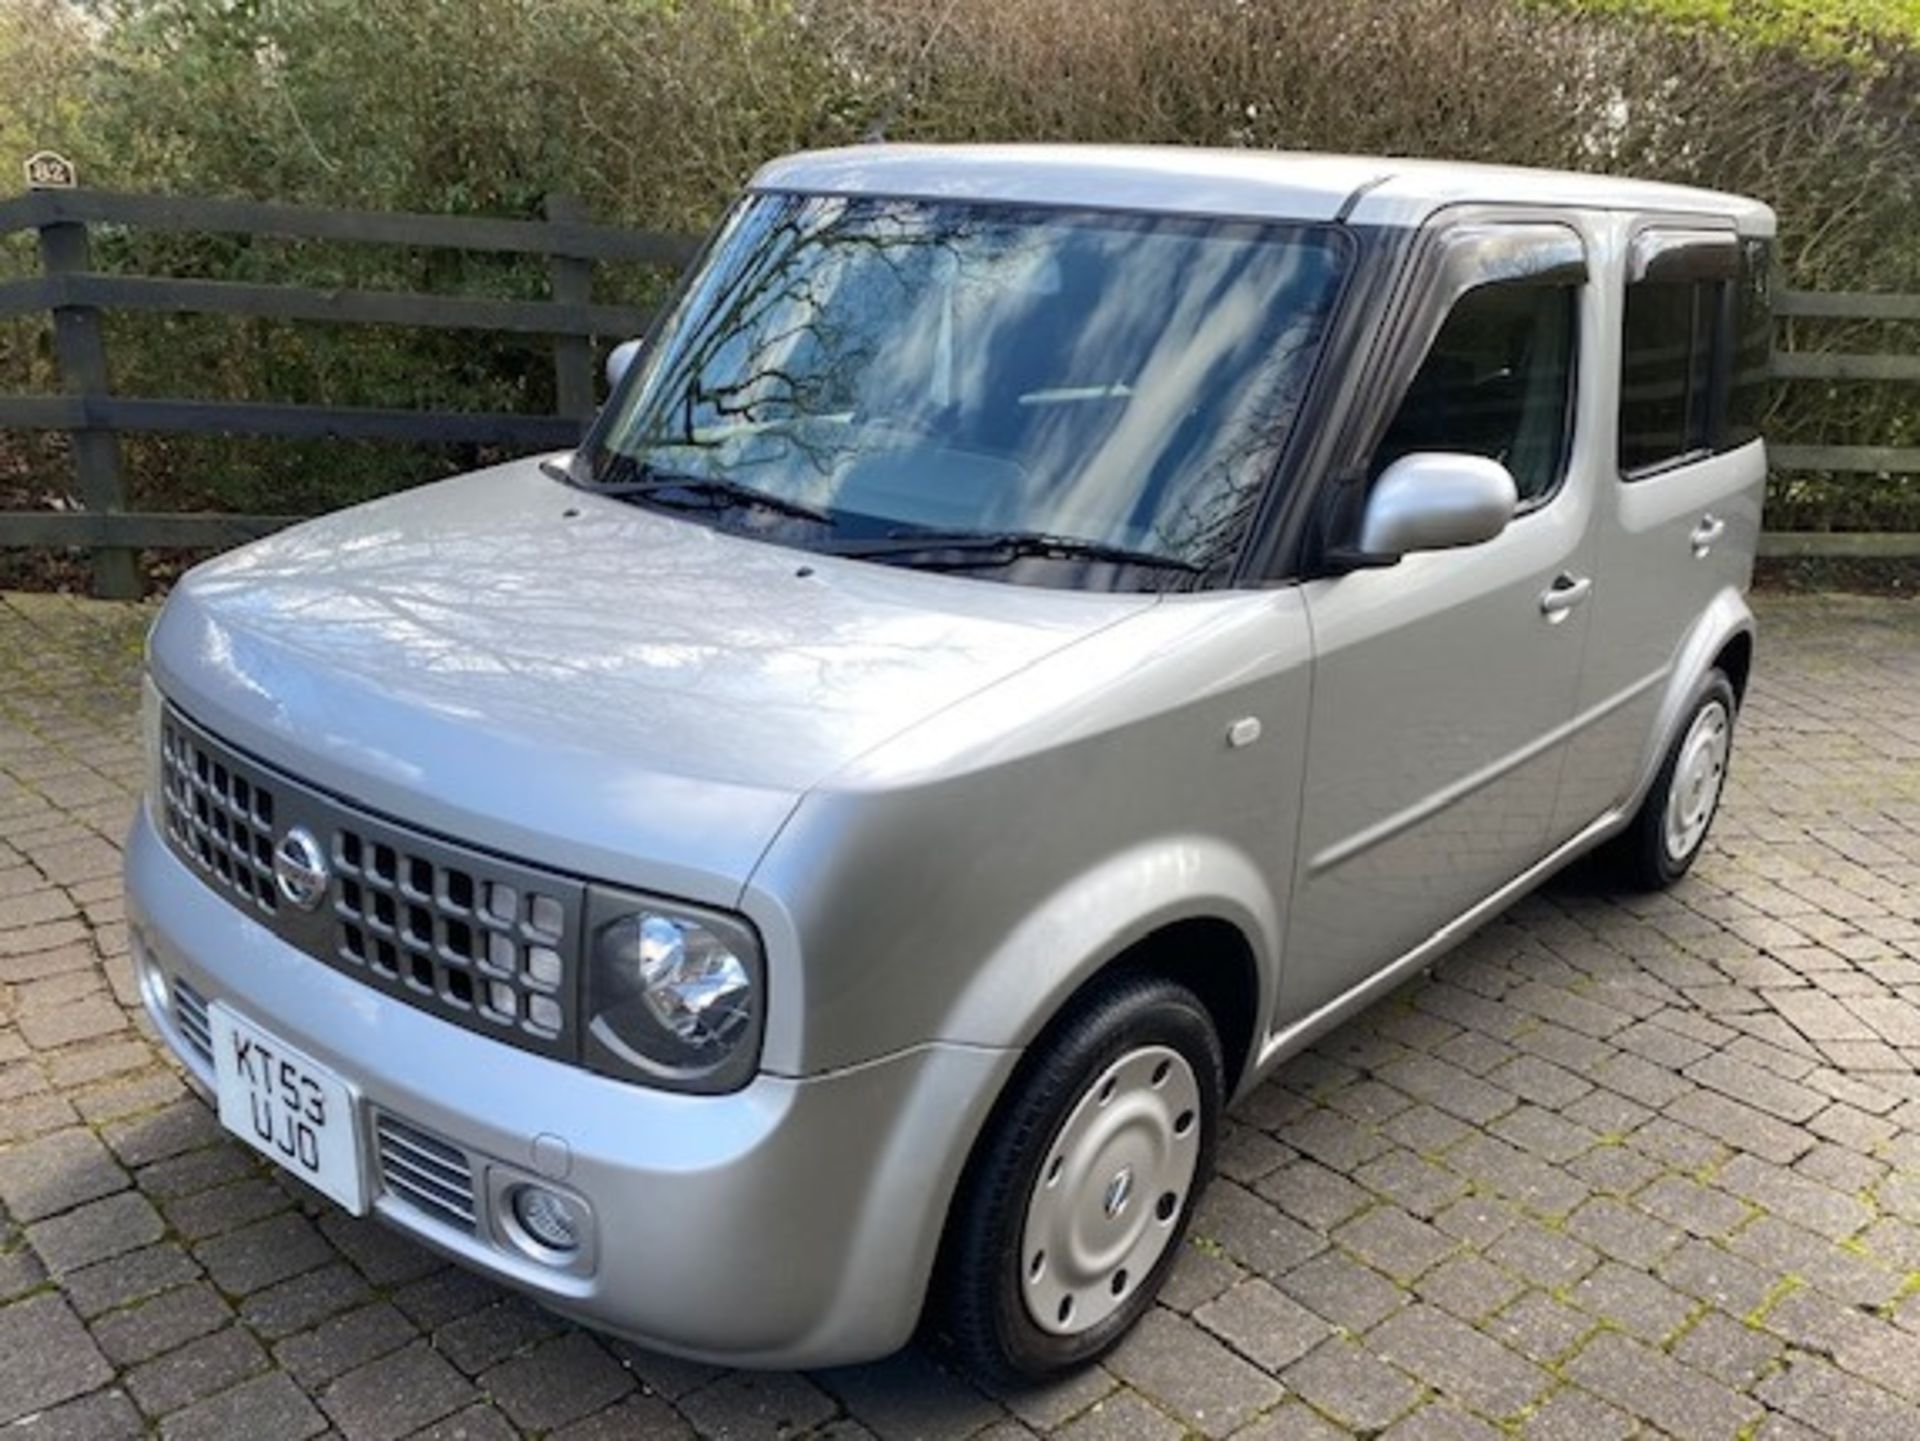 2003 Nissan Cube 1.4 Auto - Image 3 of 10